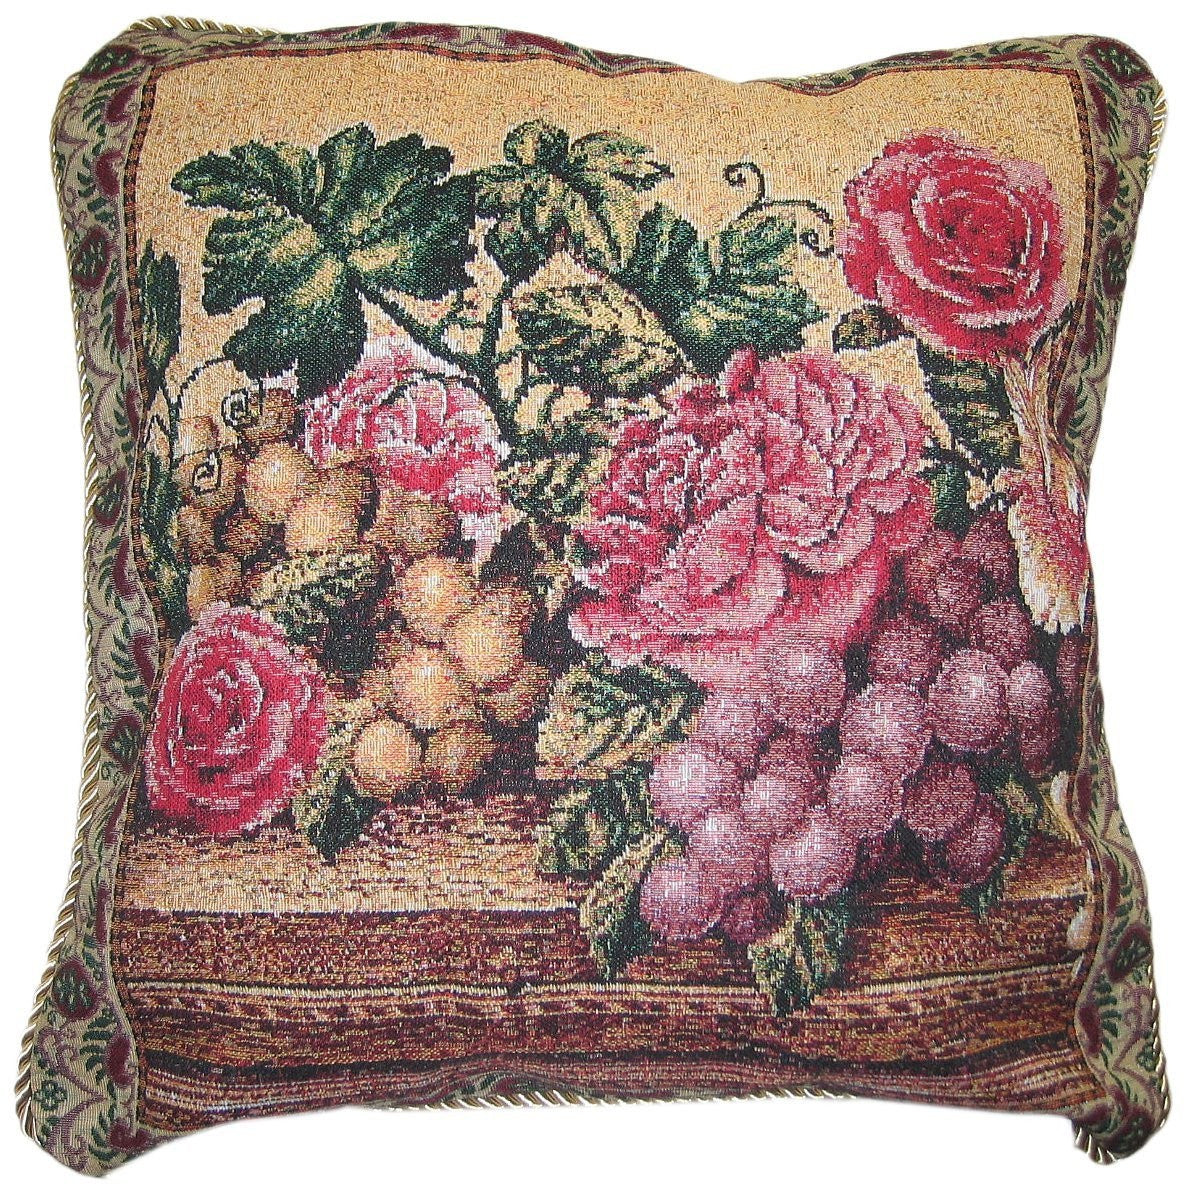 Romantic Parade of Fruit & Roses Botanical Grapes Elegant Novelty Woven Accent Cushion Cover Throw Toss Pillow Case - 18" - 1-Piece - Stores Basement - Discount Bedding